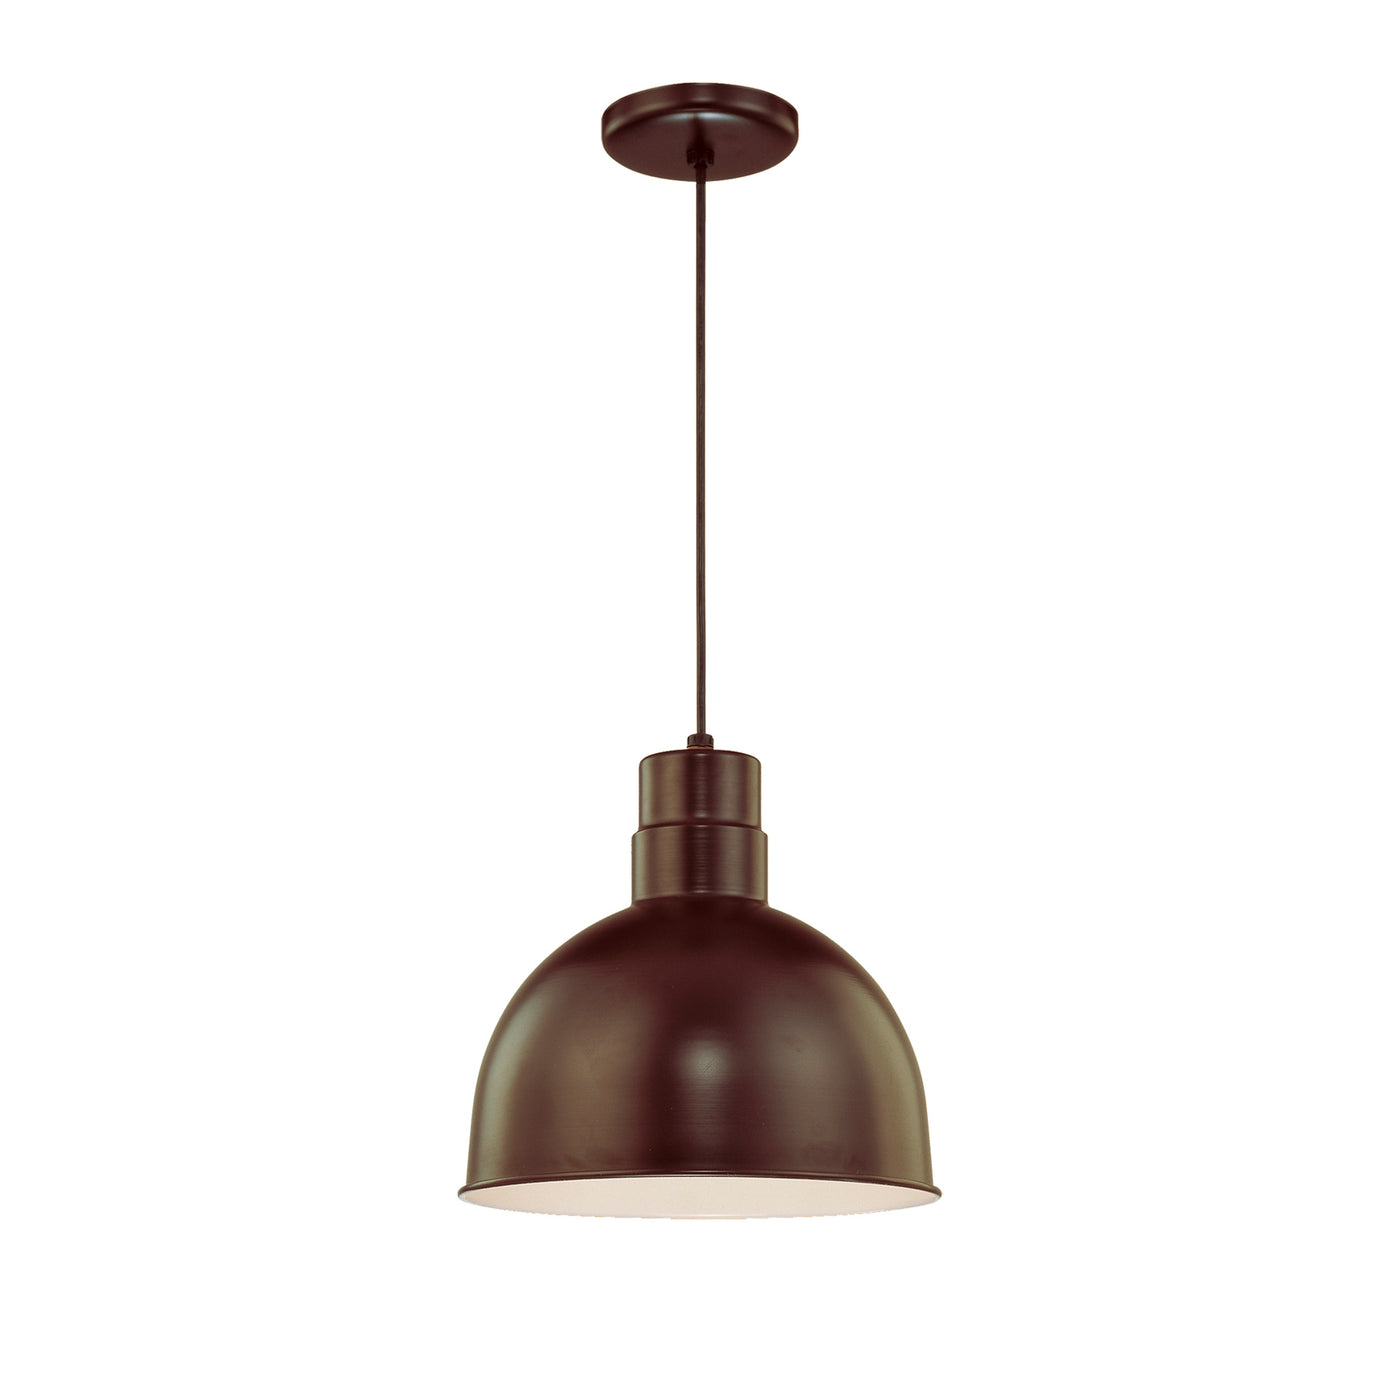 Millennium Lighting 12" RLM/ Cord Hung Deep Bowl Shade (Available in Bronze, Galvanized, Black, Red, and Green Finishes)